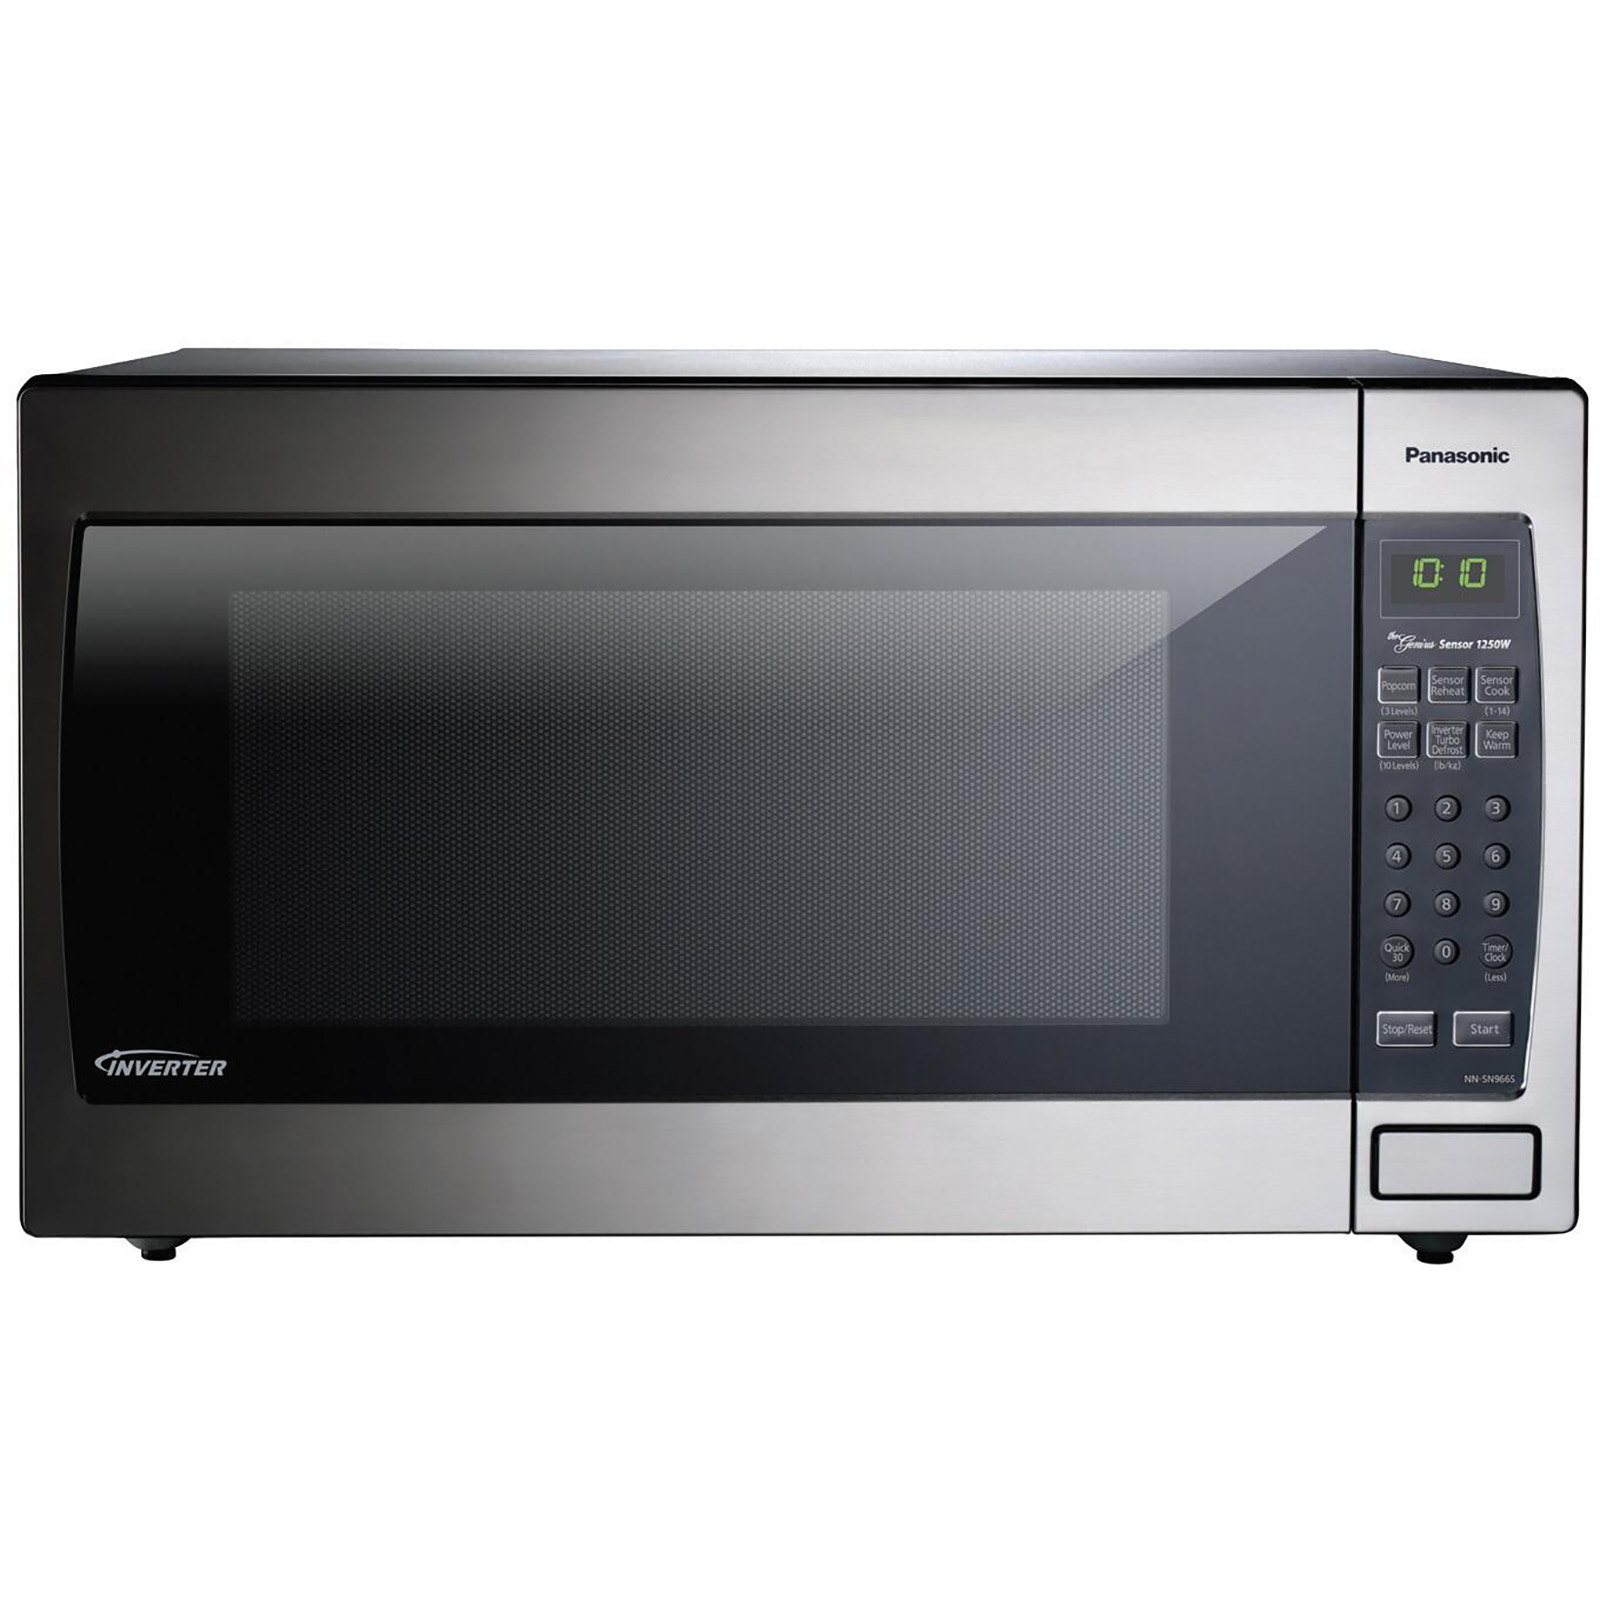 Panasonic NNSN966S 2.2cu.ft Countertop Microwave with Inverter Technology - Stainless Steel